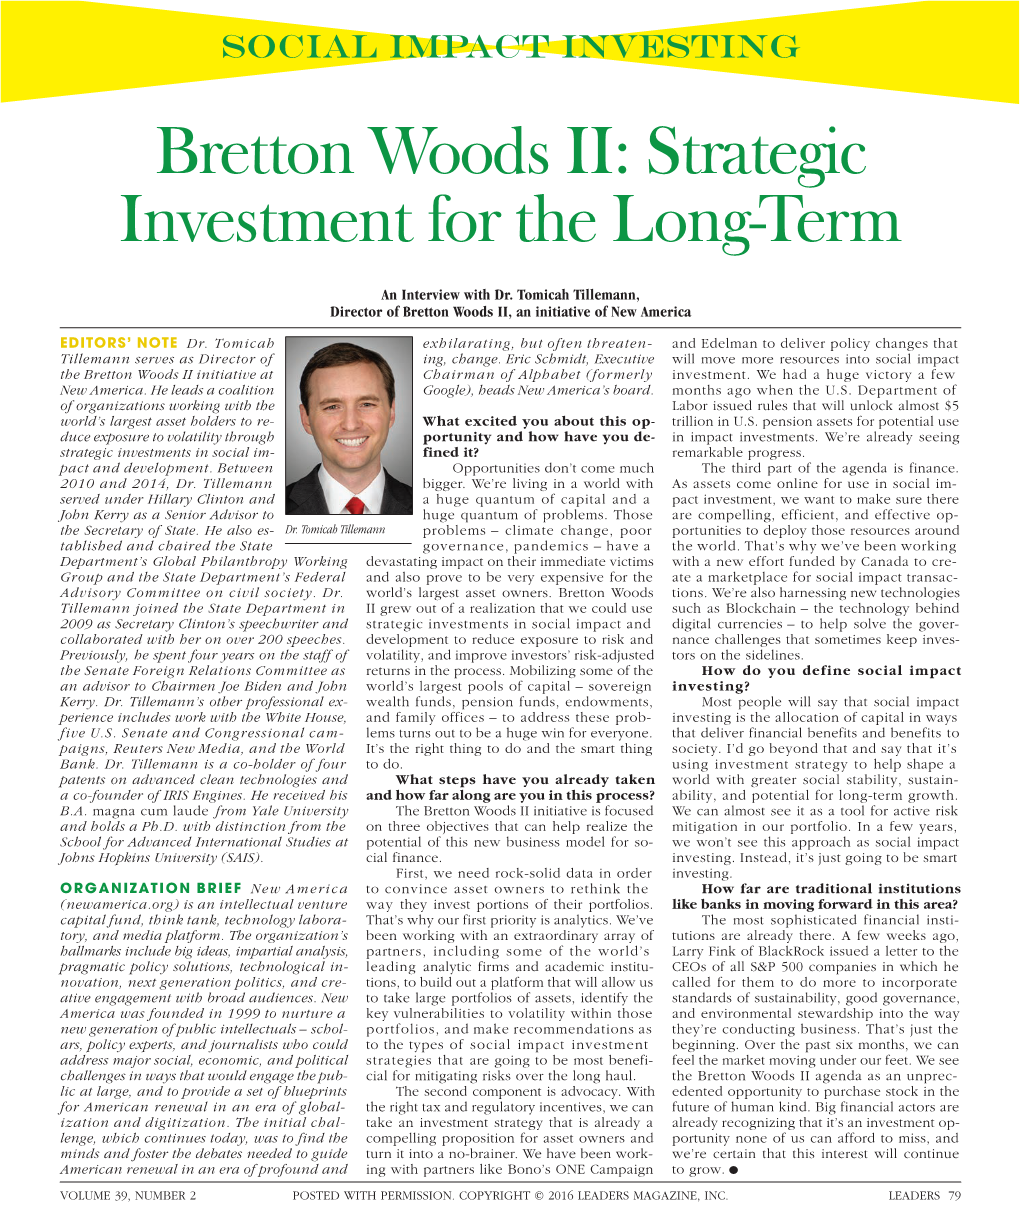 Bretton Woods II: Strategic Investment for the Long-Term